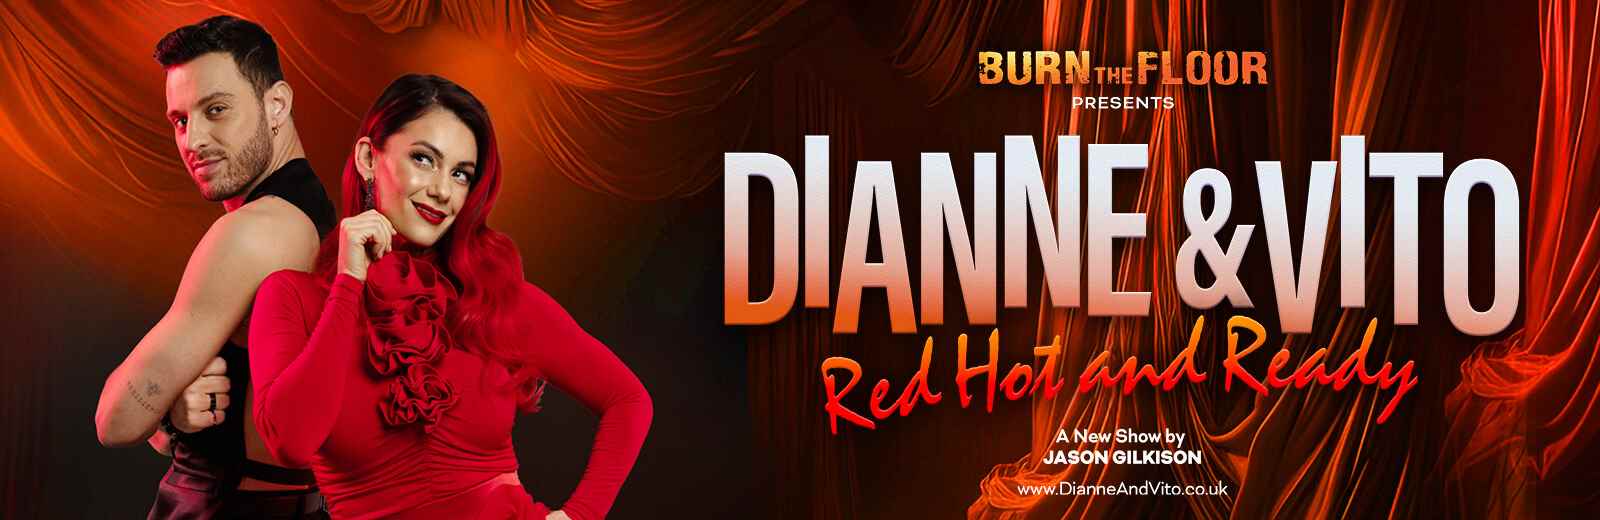 Burn The Floor presents - DIANNE AND VITO - Red Hot and Ready